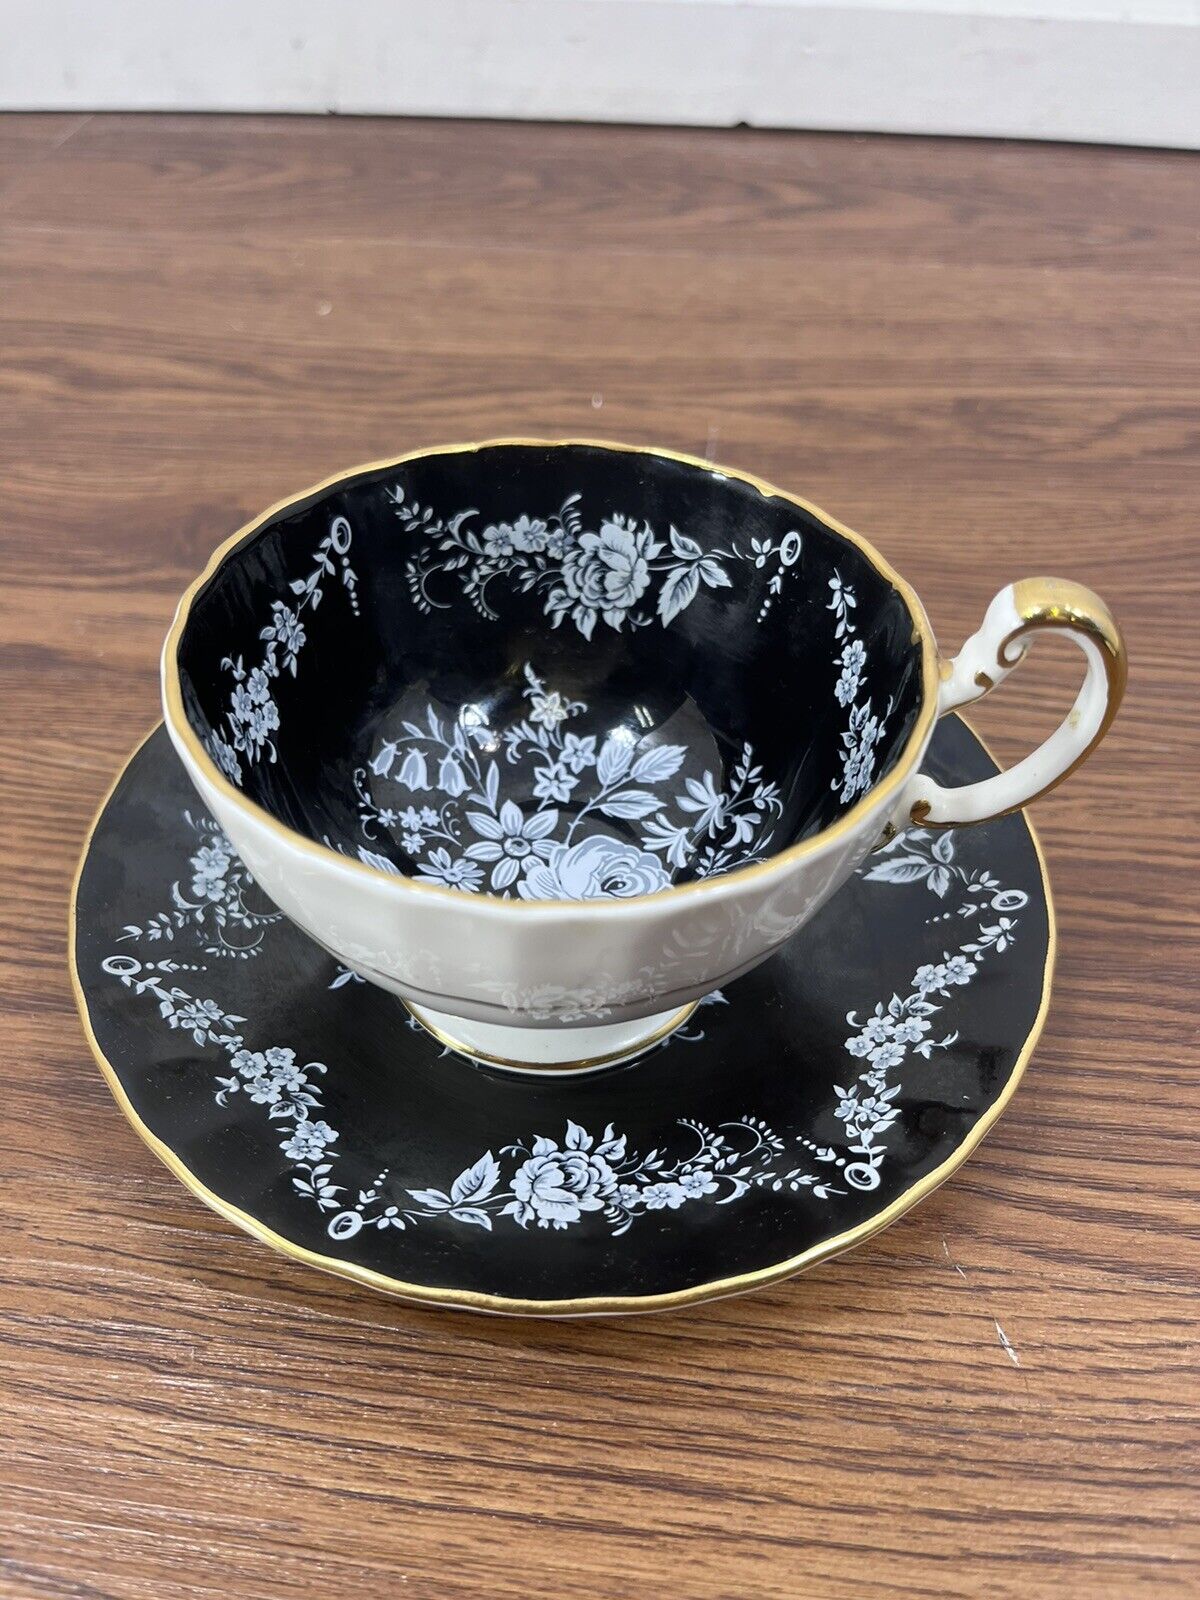 Vintage AYNSLEY Footed Black Teacup Saucer with White Flowers Bone China